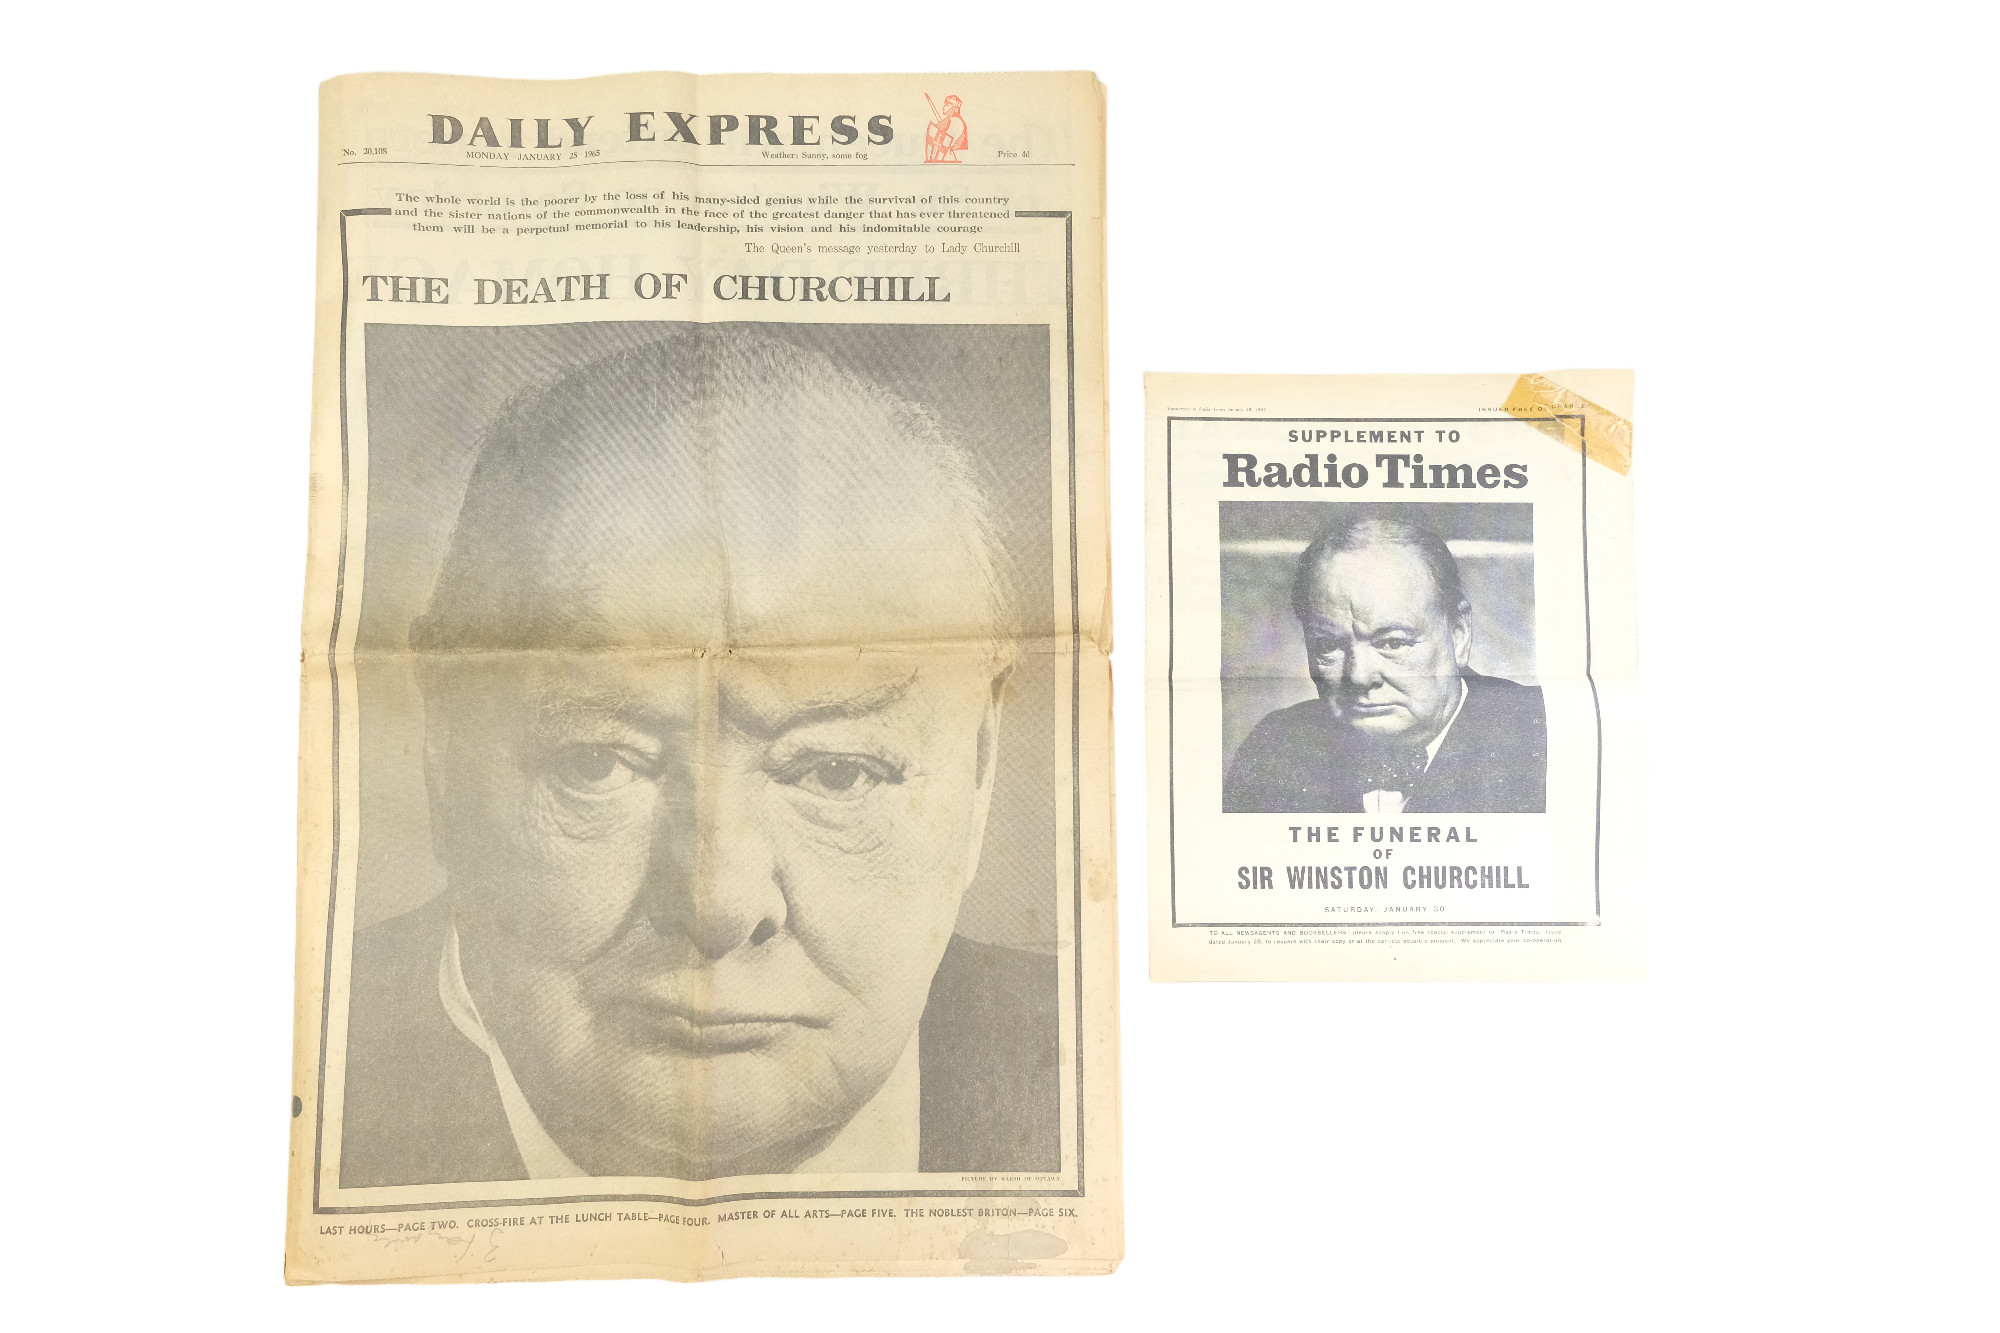 A Daily Express newspaper detailing "The Death of Churchill", dated Monday January 25, 1965,